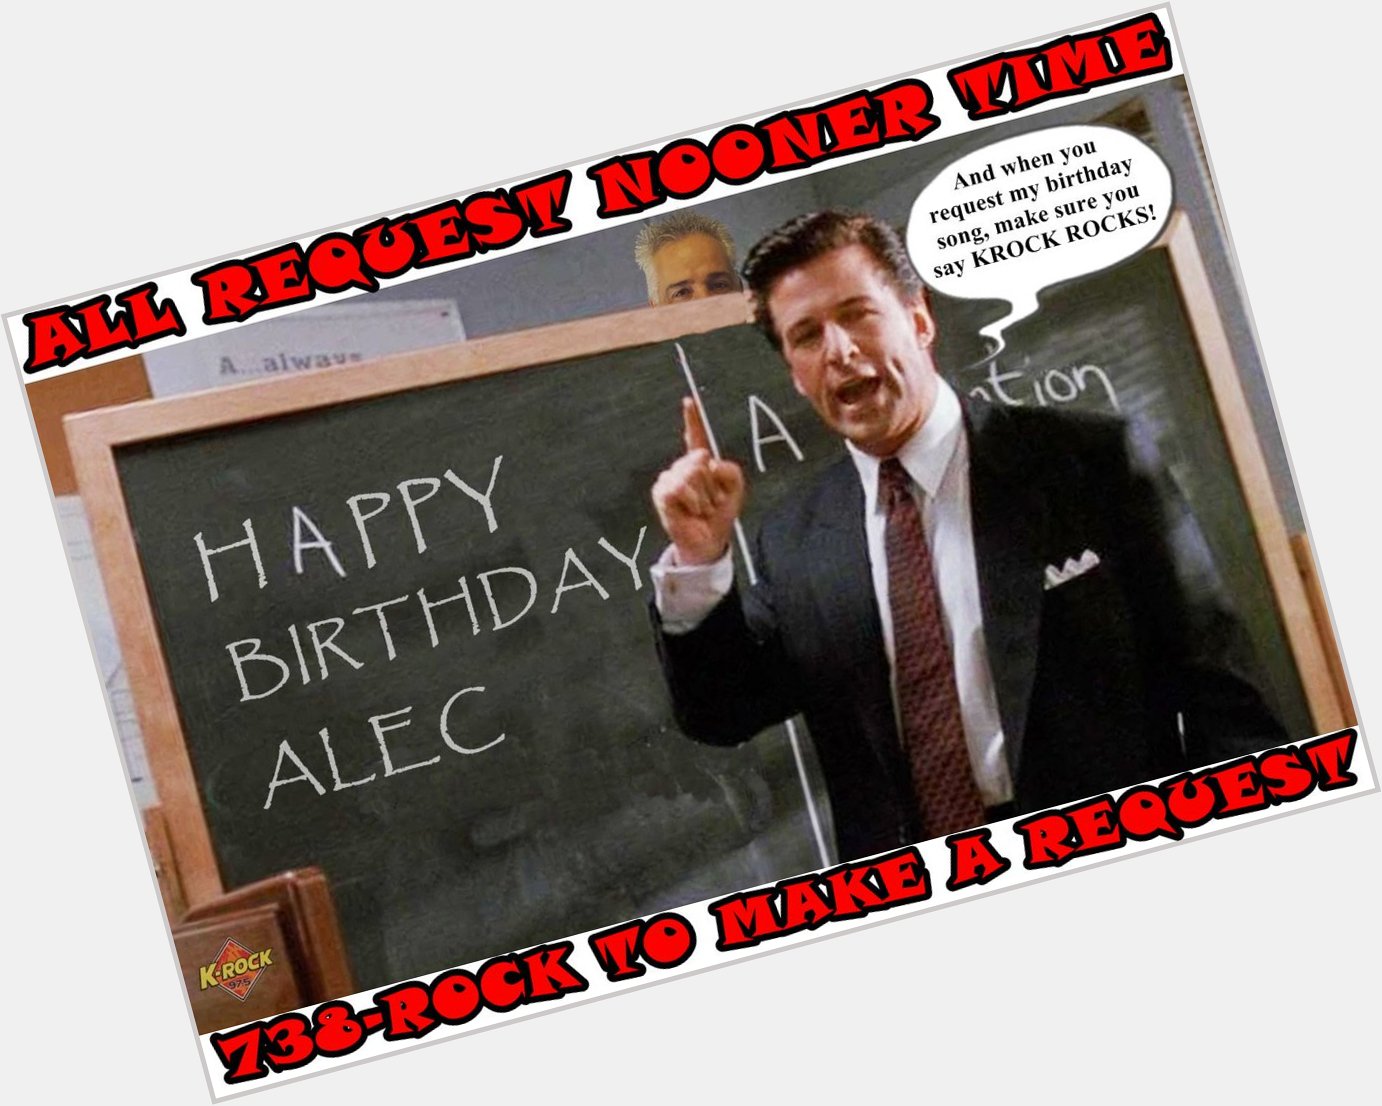 Happy birthday Alec Baldwin!
It\s All Request Nooner time. 
Call your request in on the ROCKLINE, 738-ROCK 